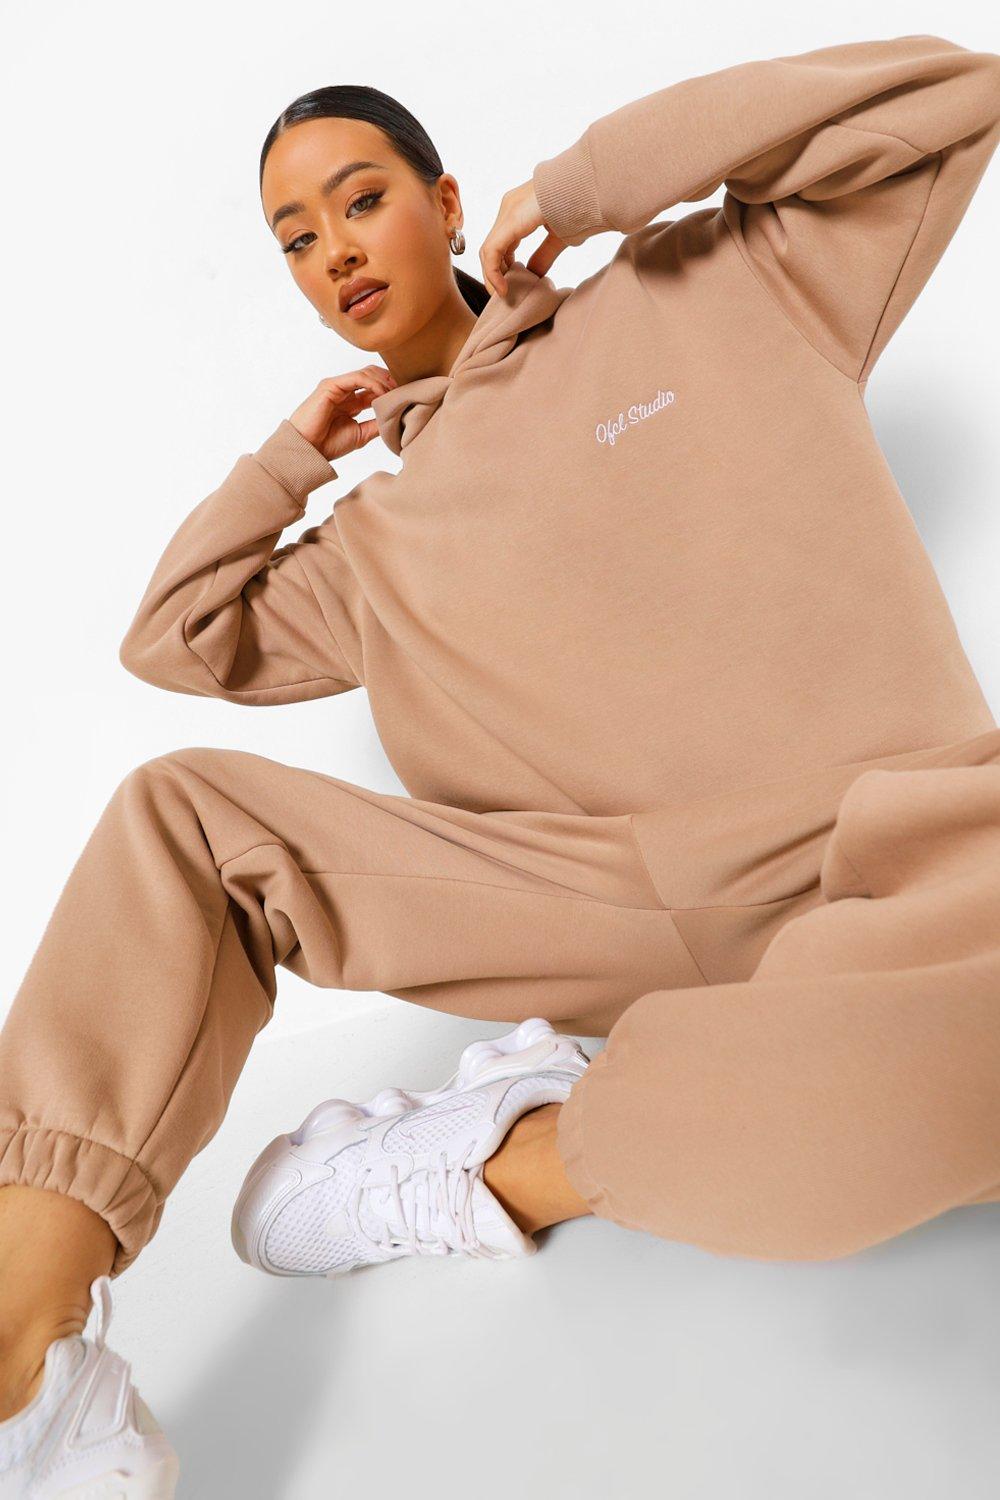 Oversized Ofcl Studio Embroidered Tracksuit